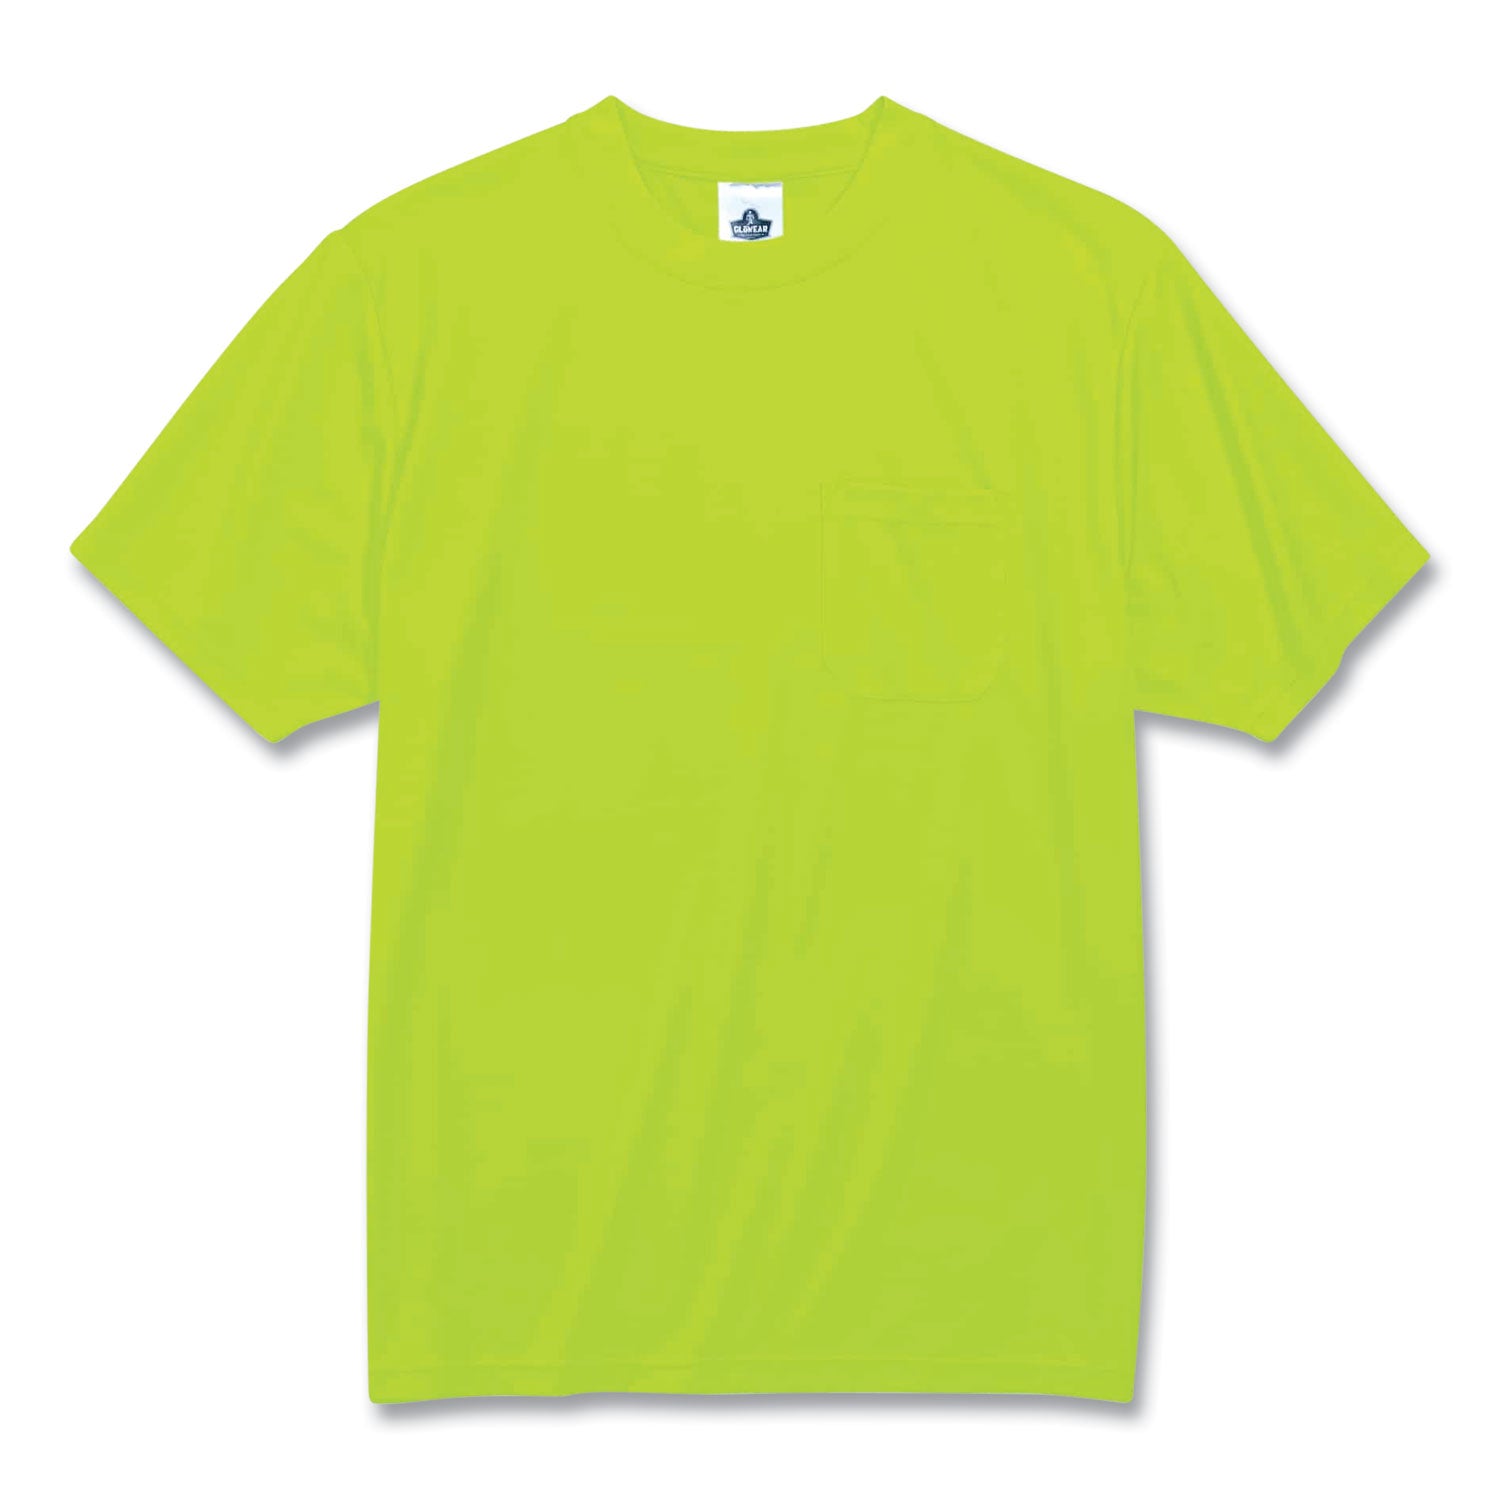 glowear-8089-non-certified-hi-vis-t-shirt-polyester-large-lime-ships-in-1-3-business-days_ego21554 - 1